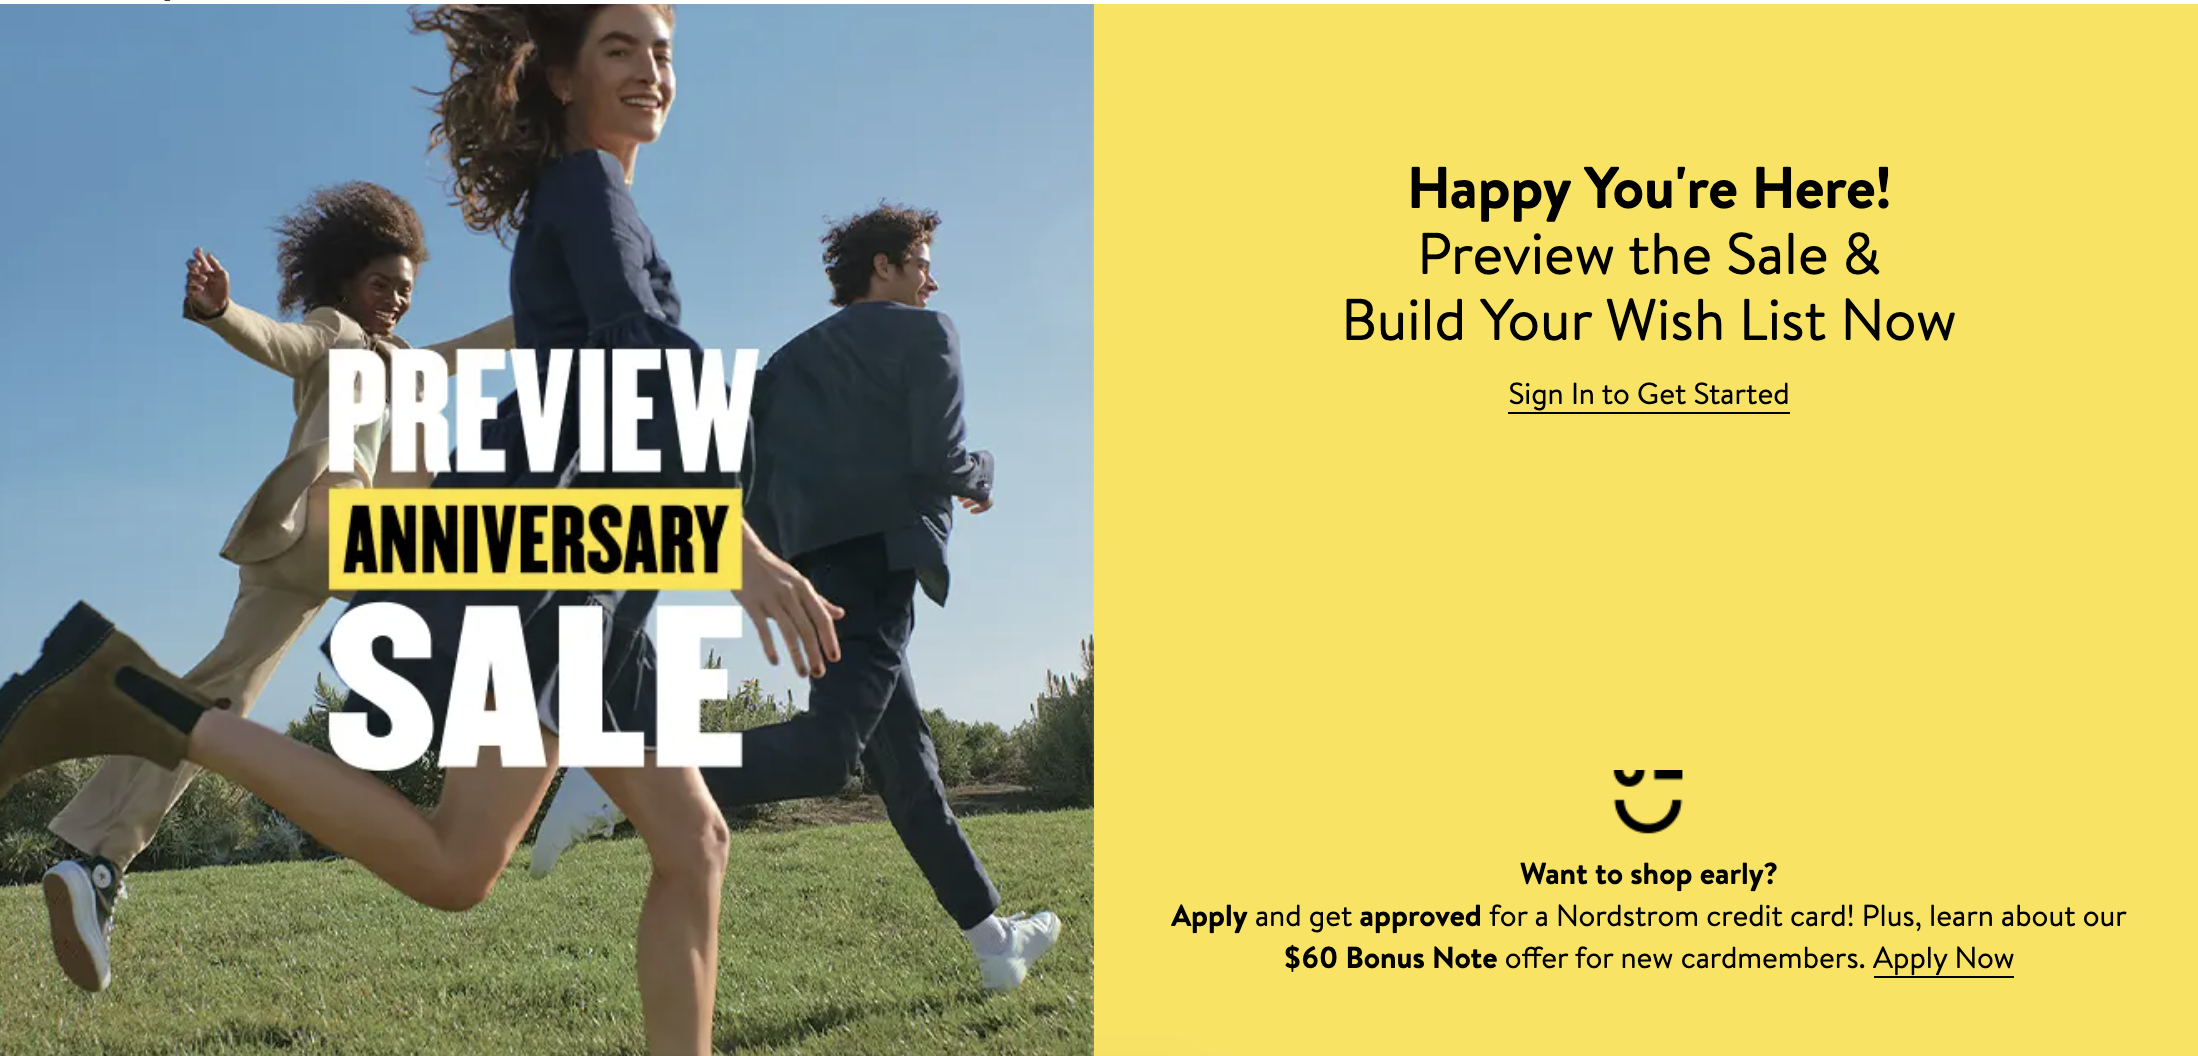 It's Preview Day for the Nordstrom Anniversary Sale! I'm not going